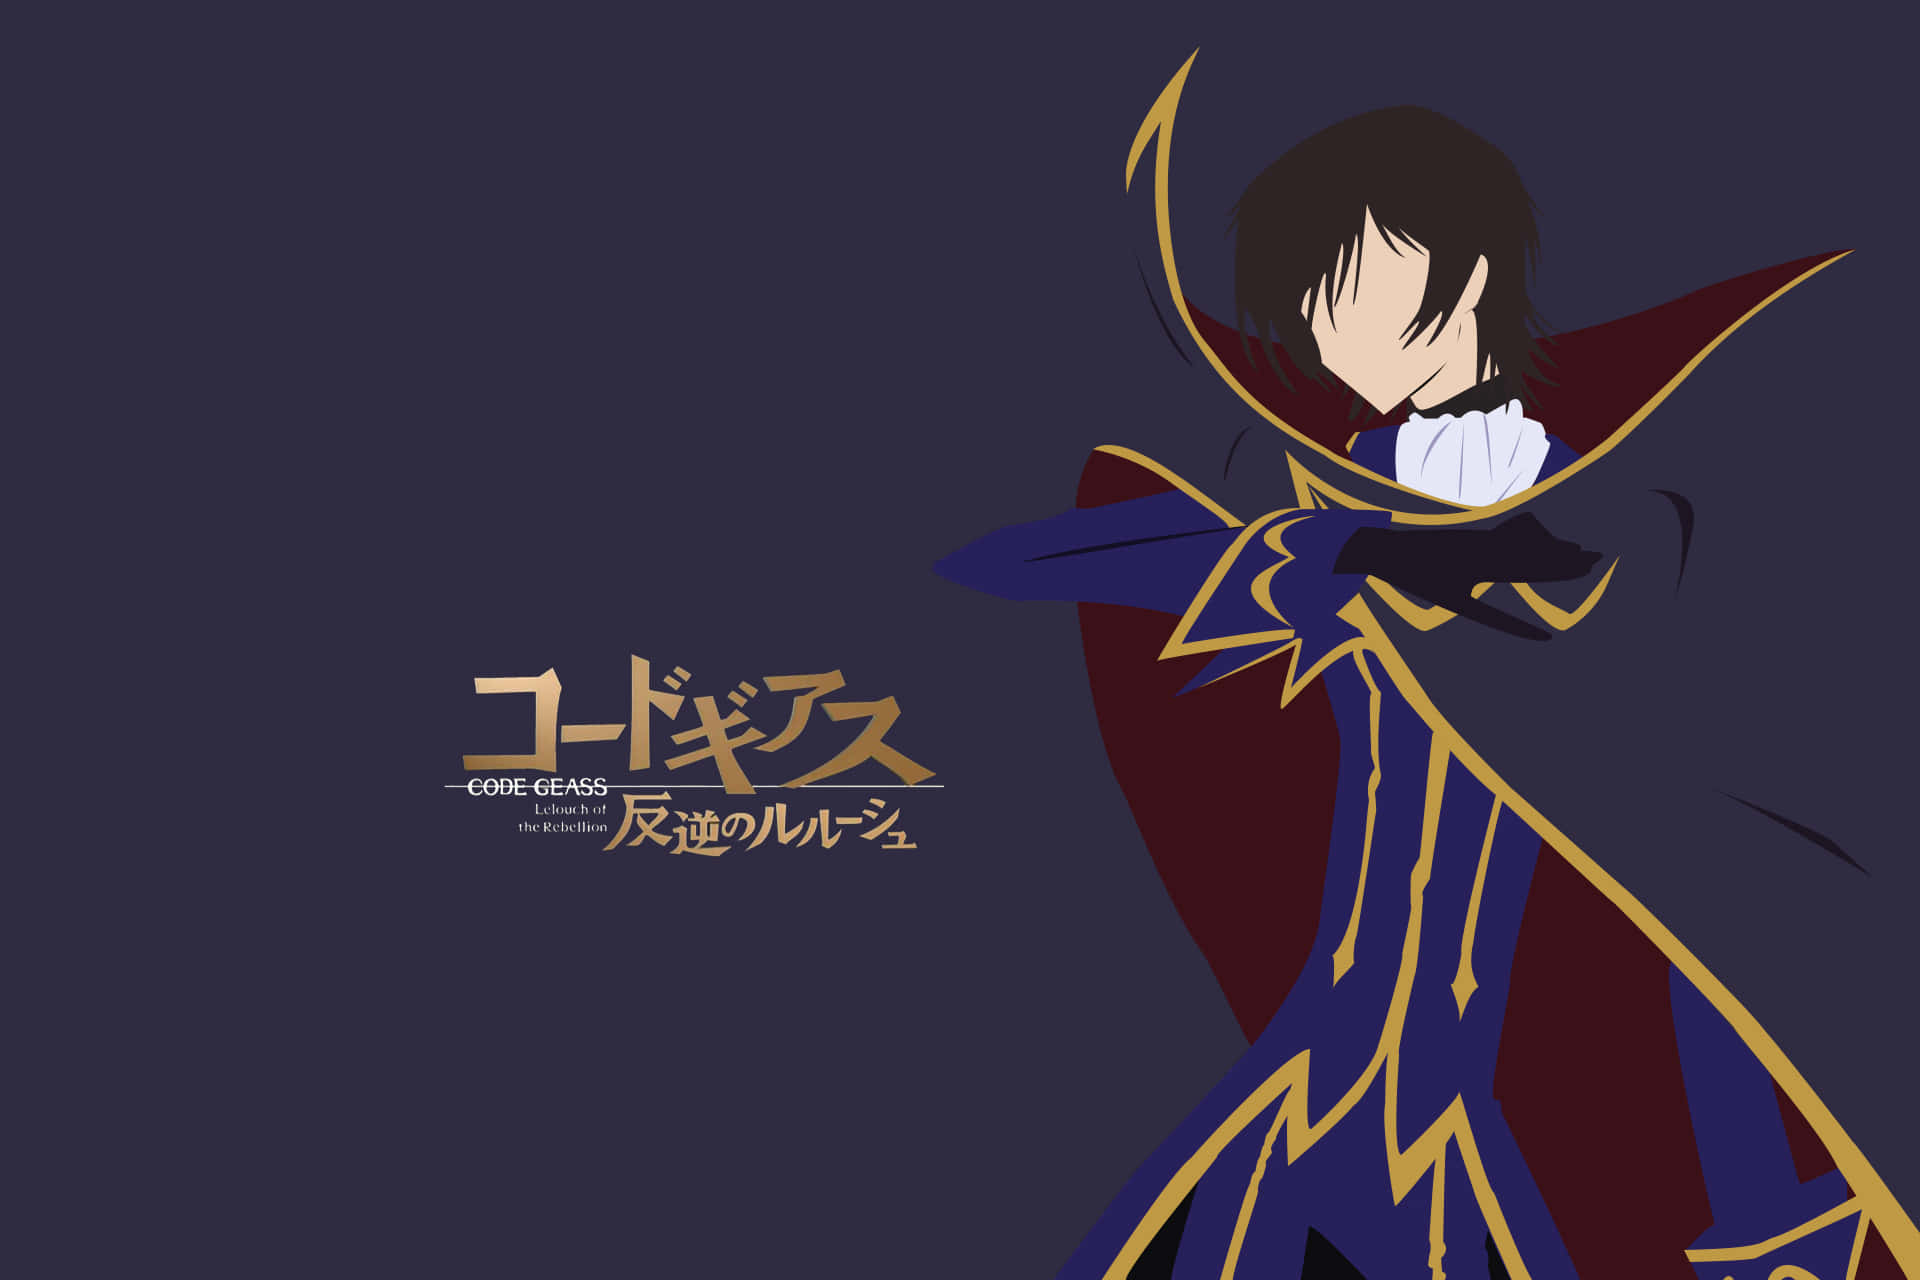 Conquer the world with Code Geass